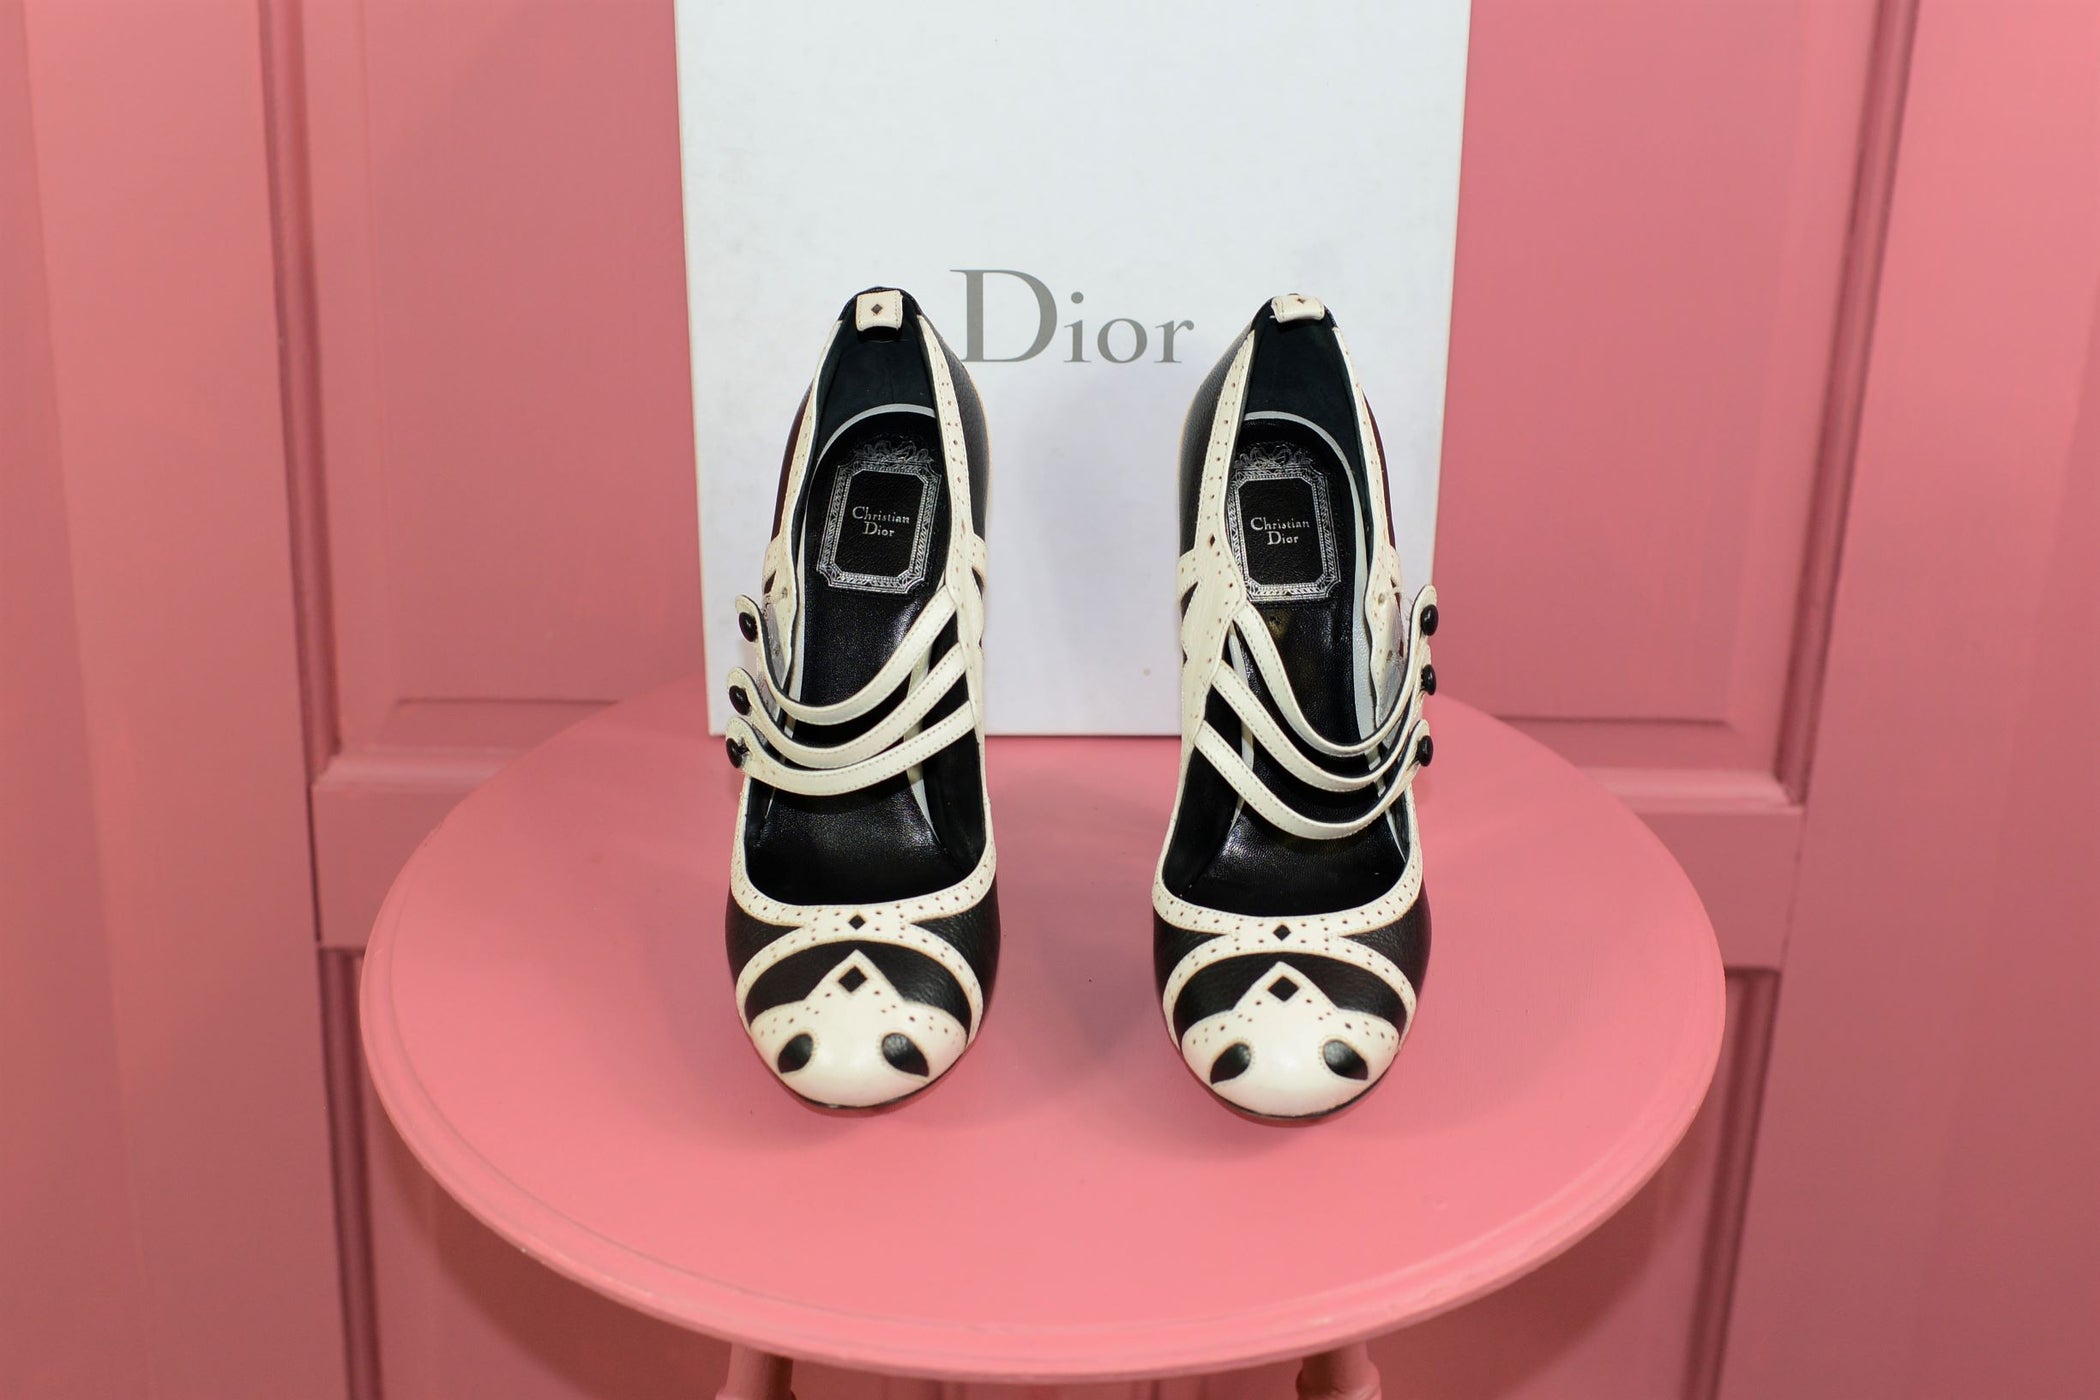 DIOR Black and White Leather Mary Jane Pumps, Size 37. Like new ...